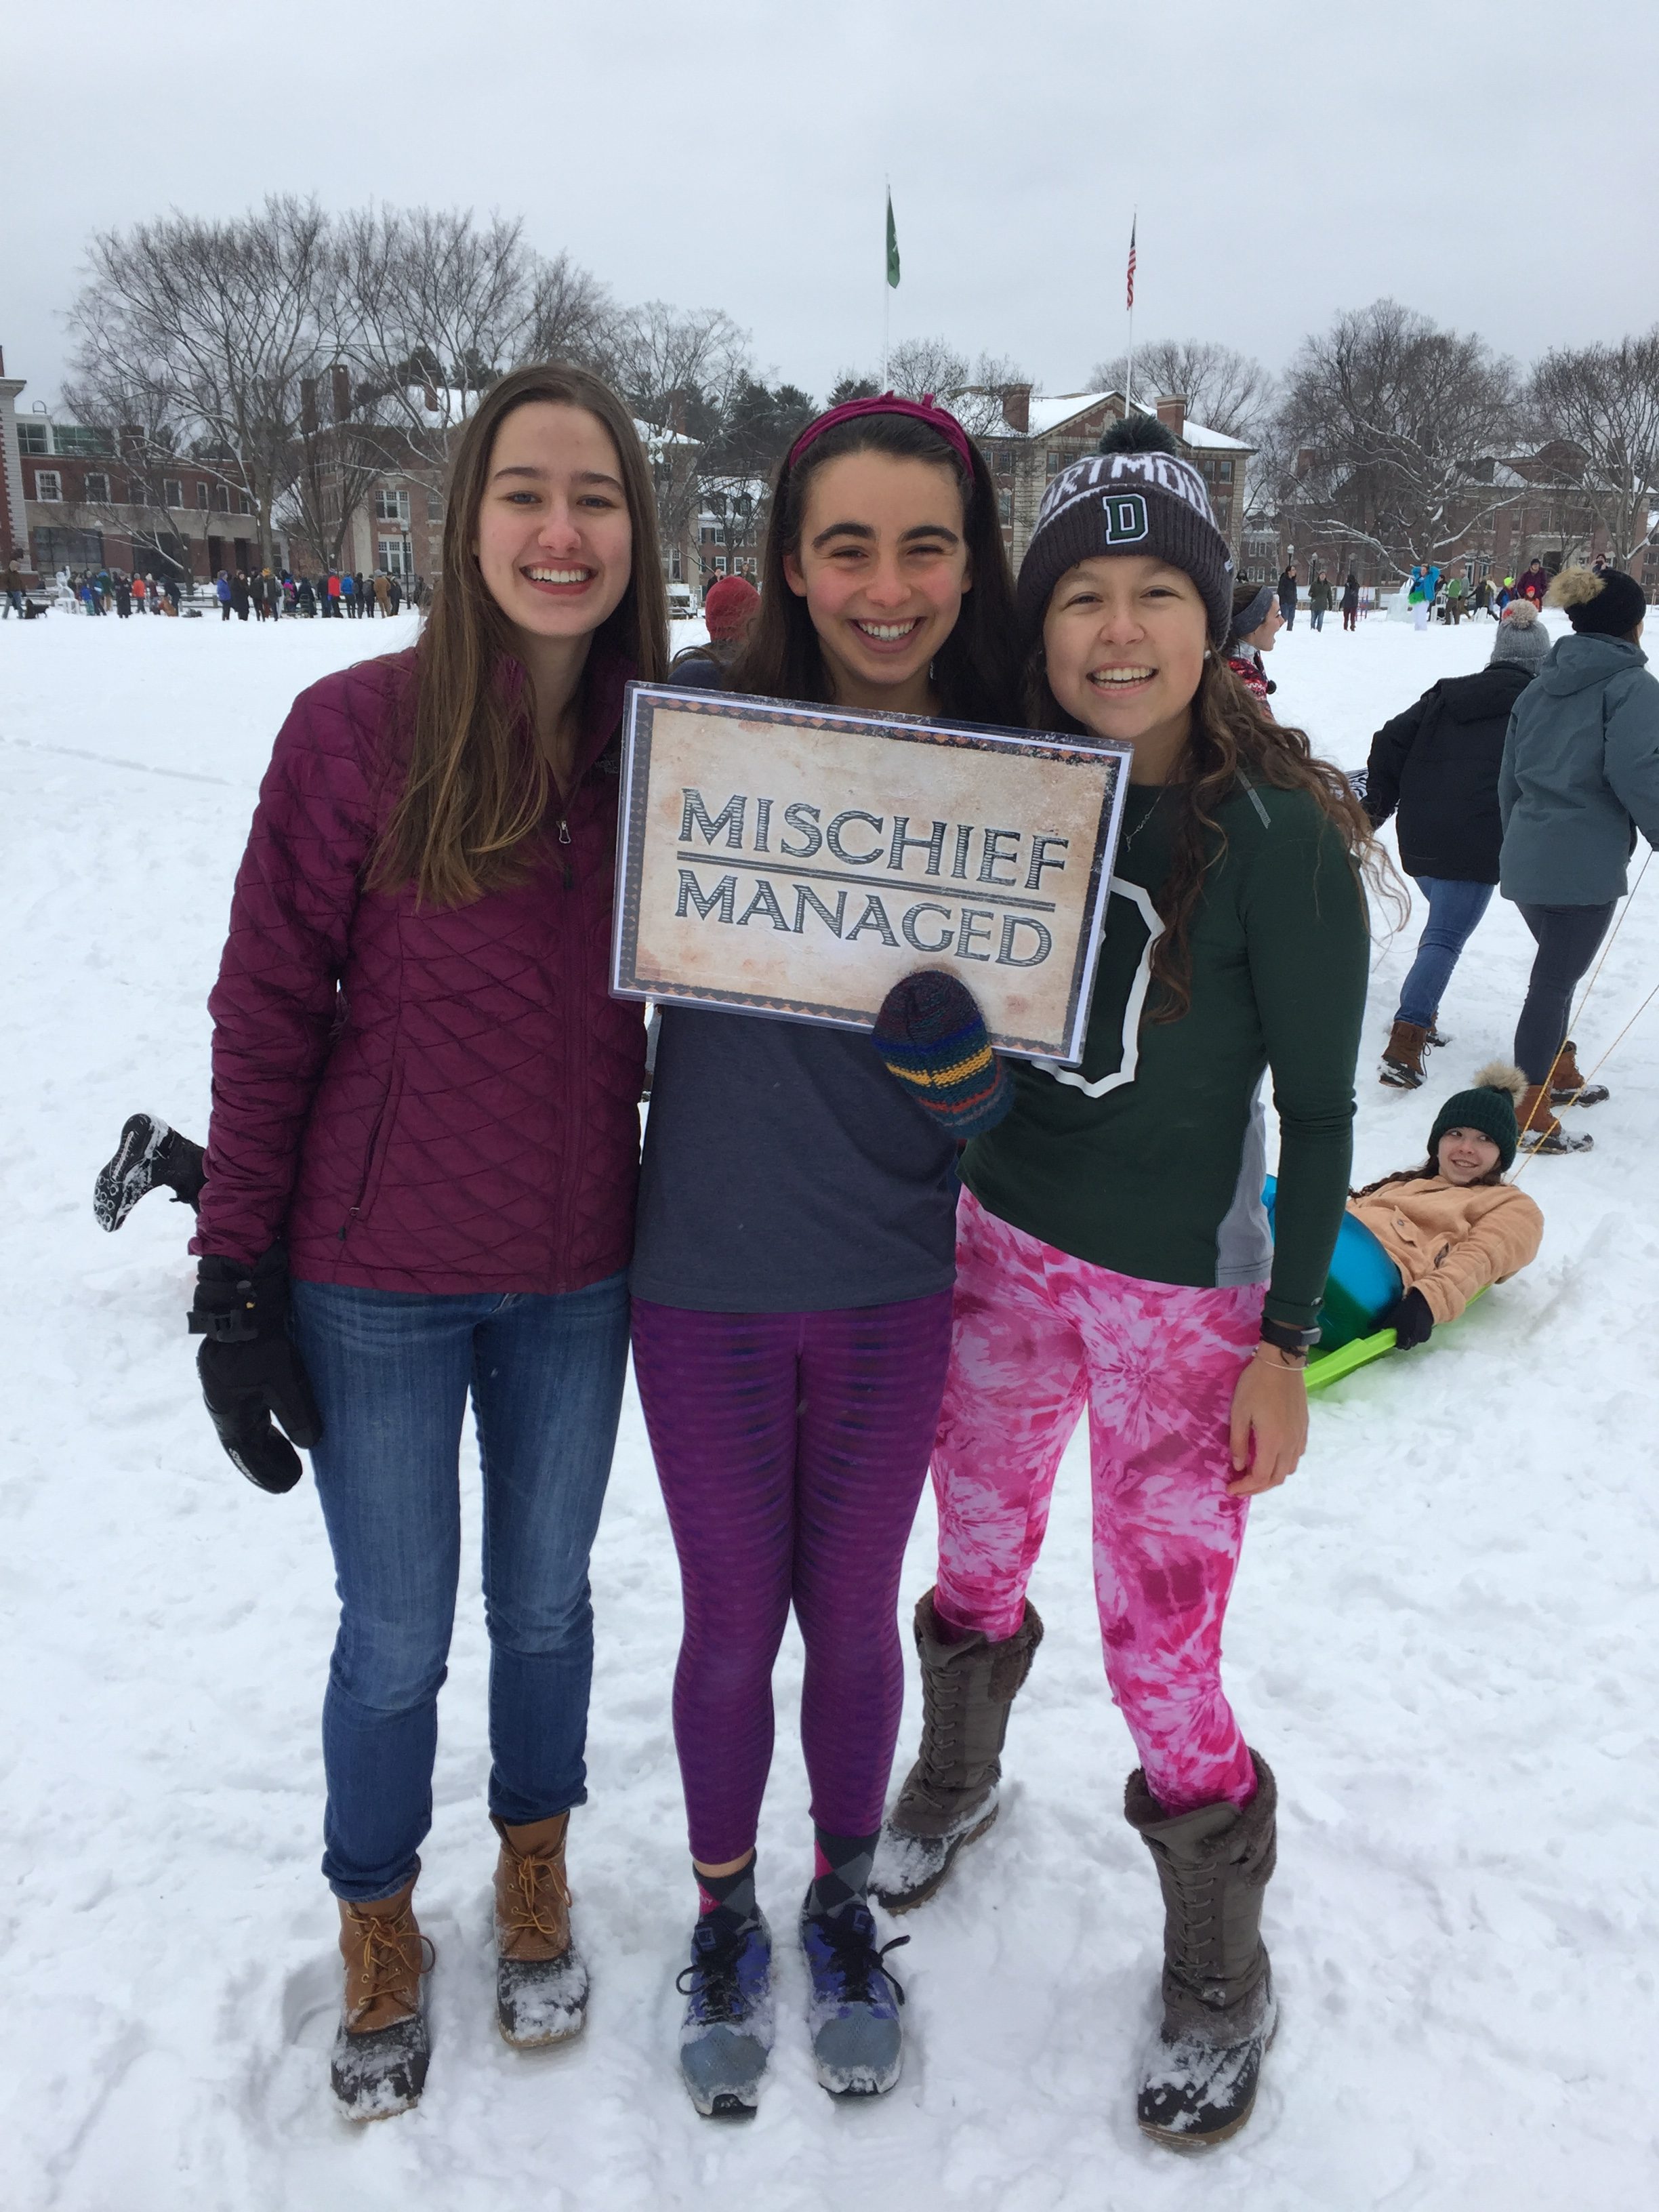 Three students with "Mischief Managed" sign